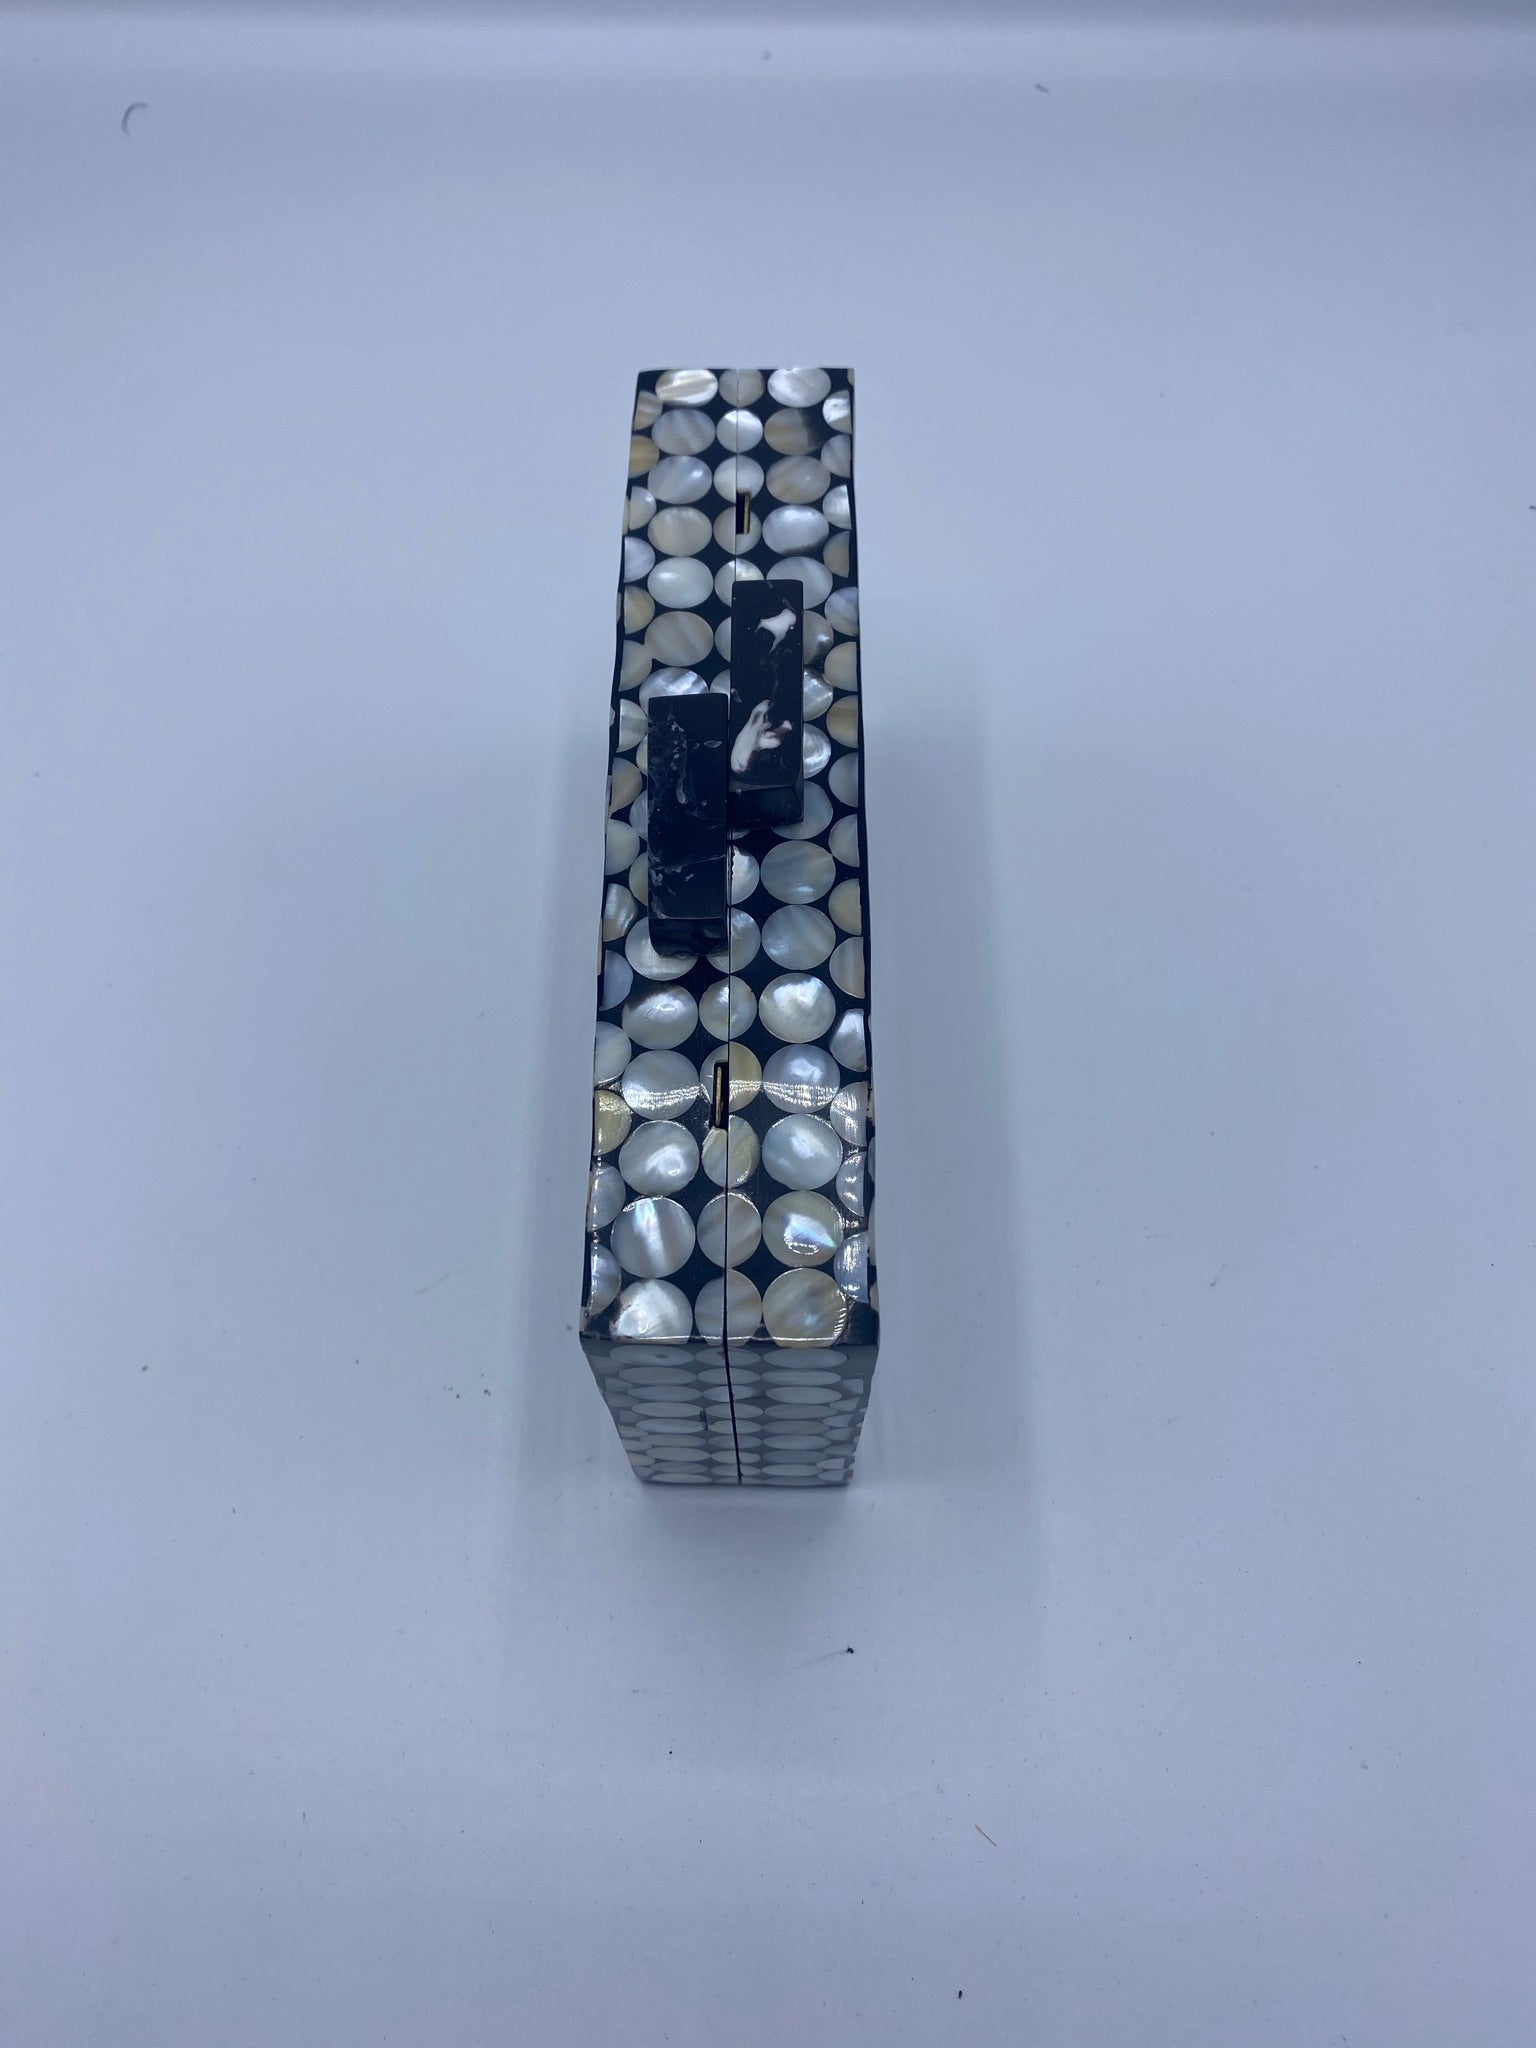 Handcrafted Pixel Ivory and Black Mother Of Pearl Clutch